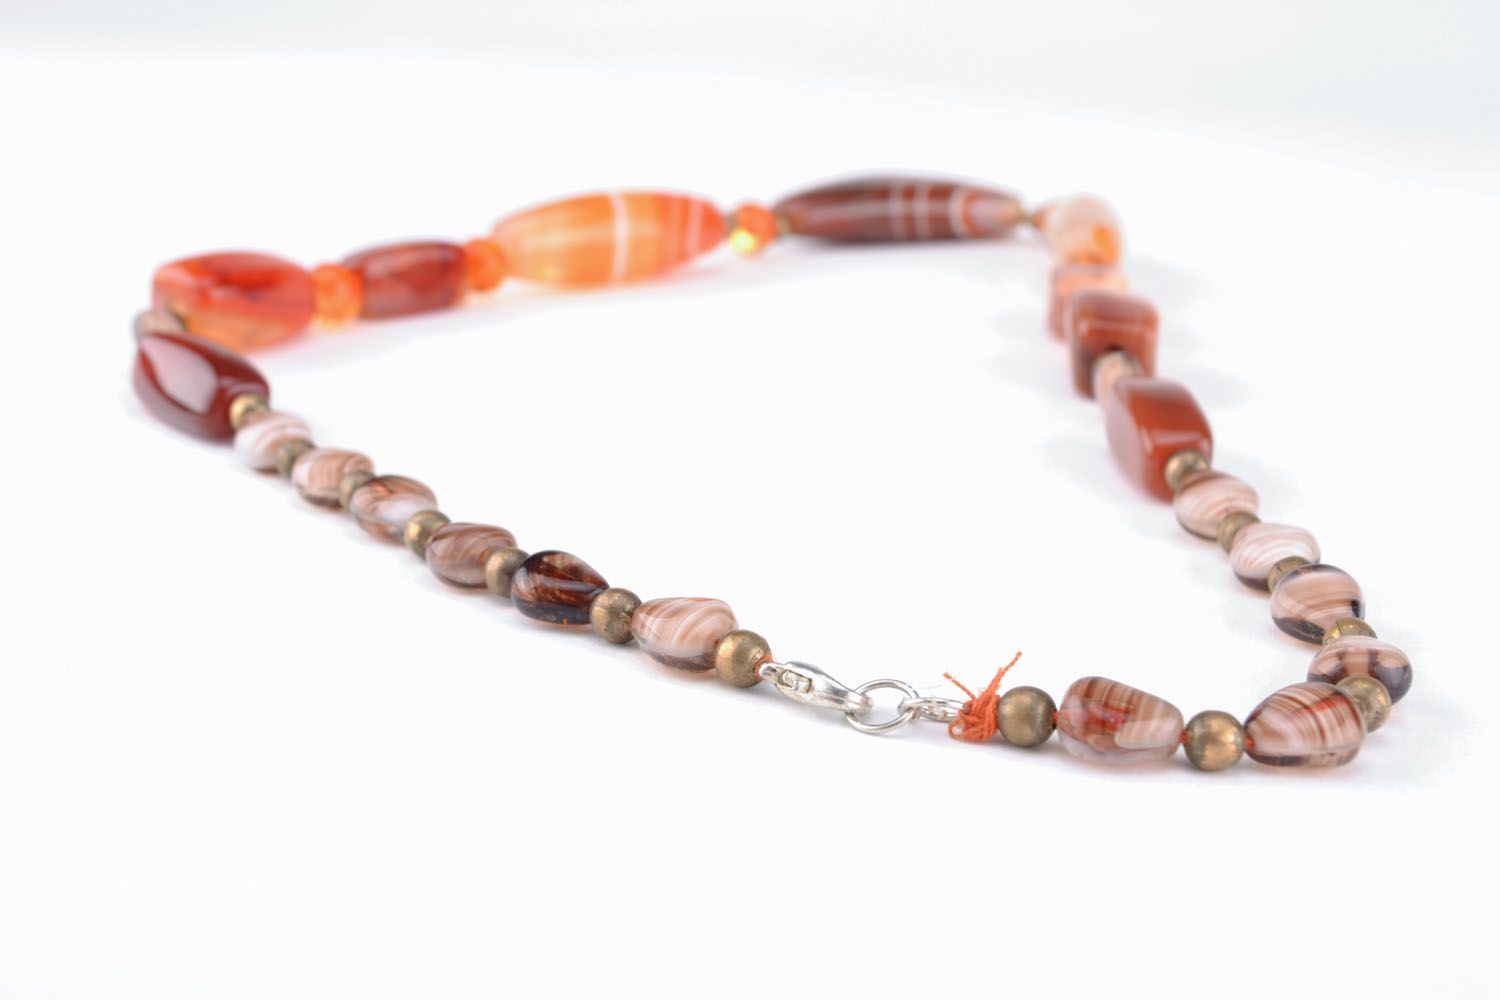 Bead necklace with natural stones and Czech glass photo 2